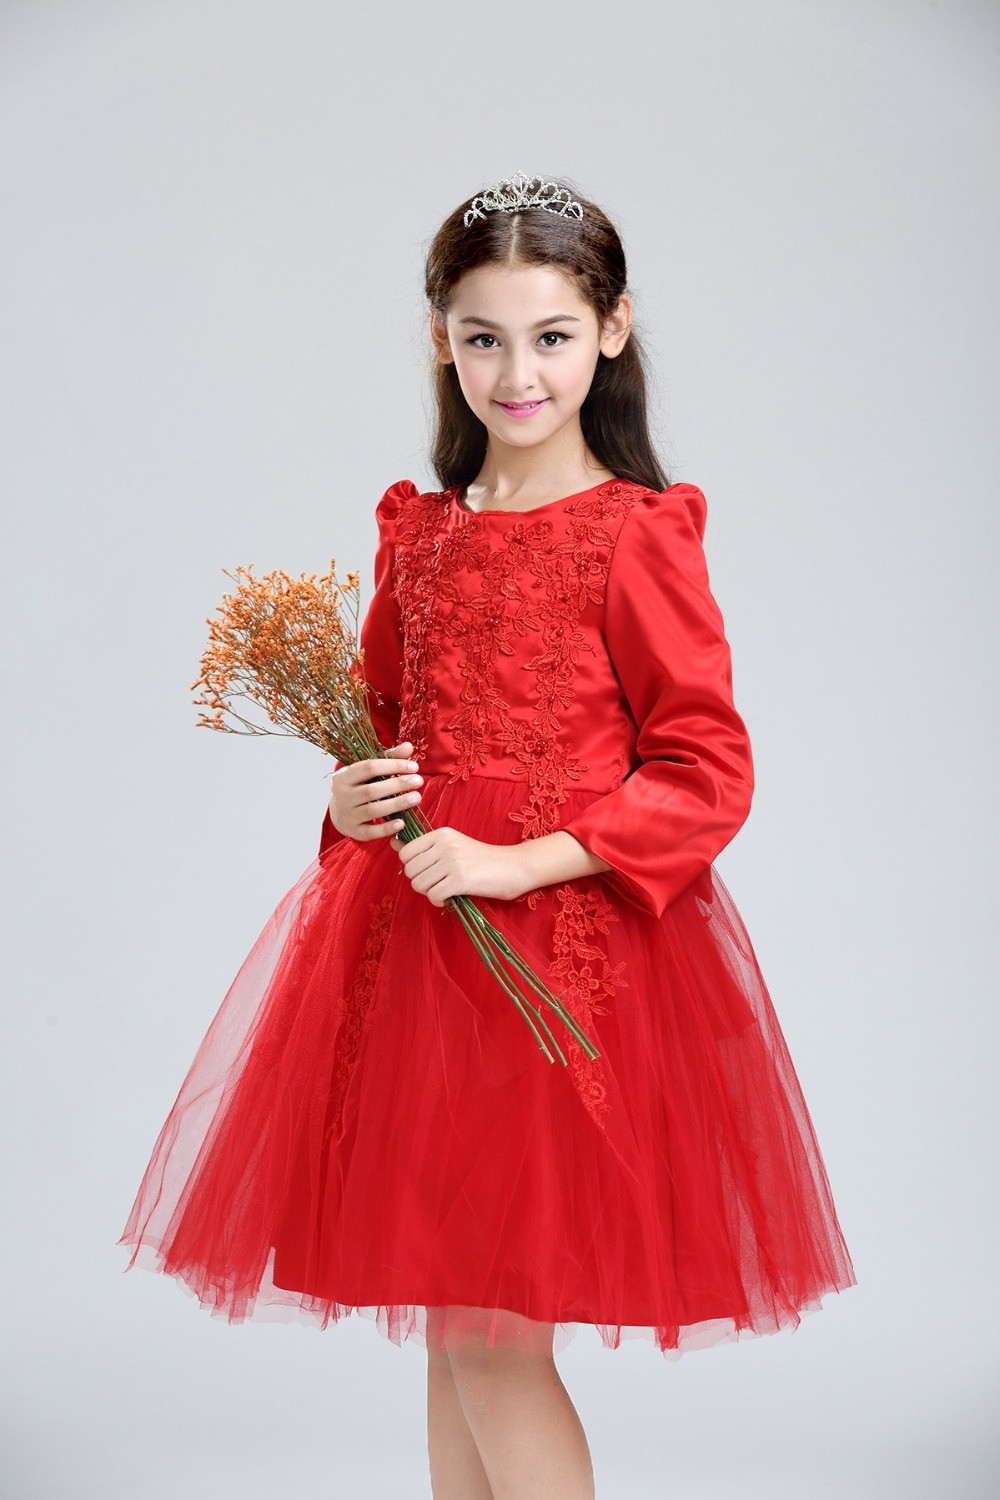 Kids Red Party Dress
 2016 Autumn Girls Toddler Dress Red Pink Beaded Embroidery